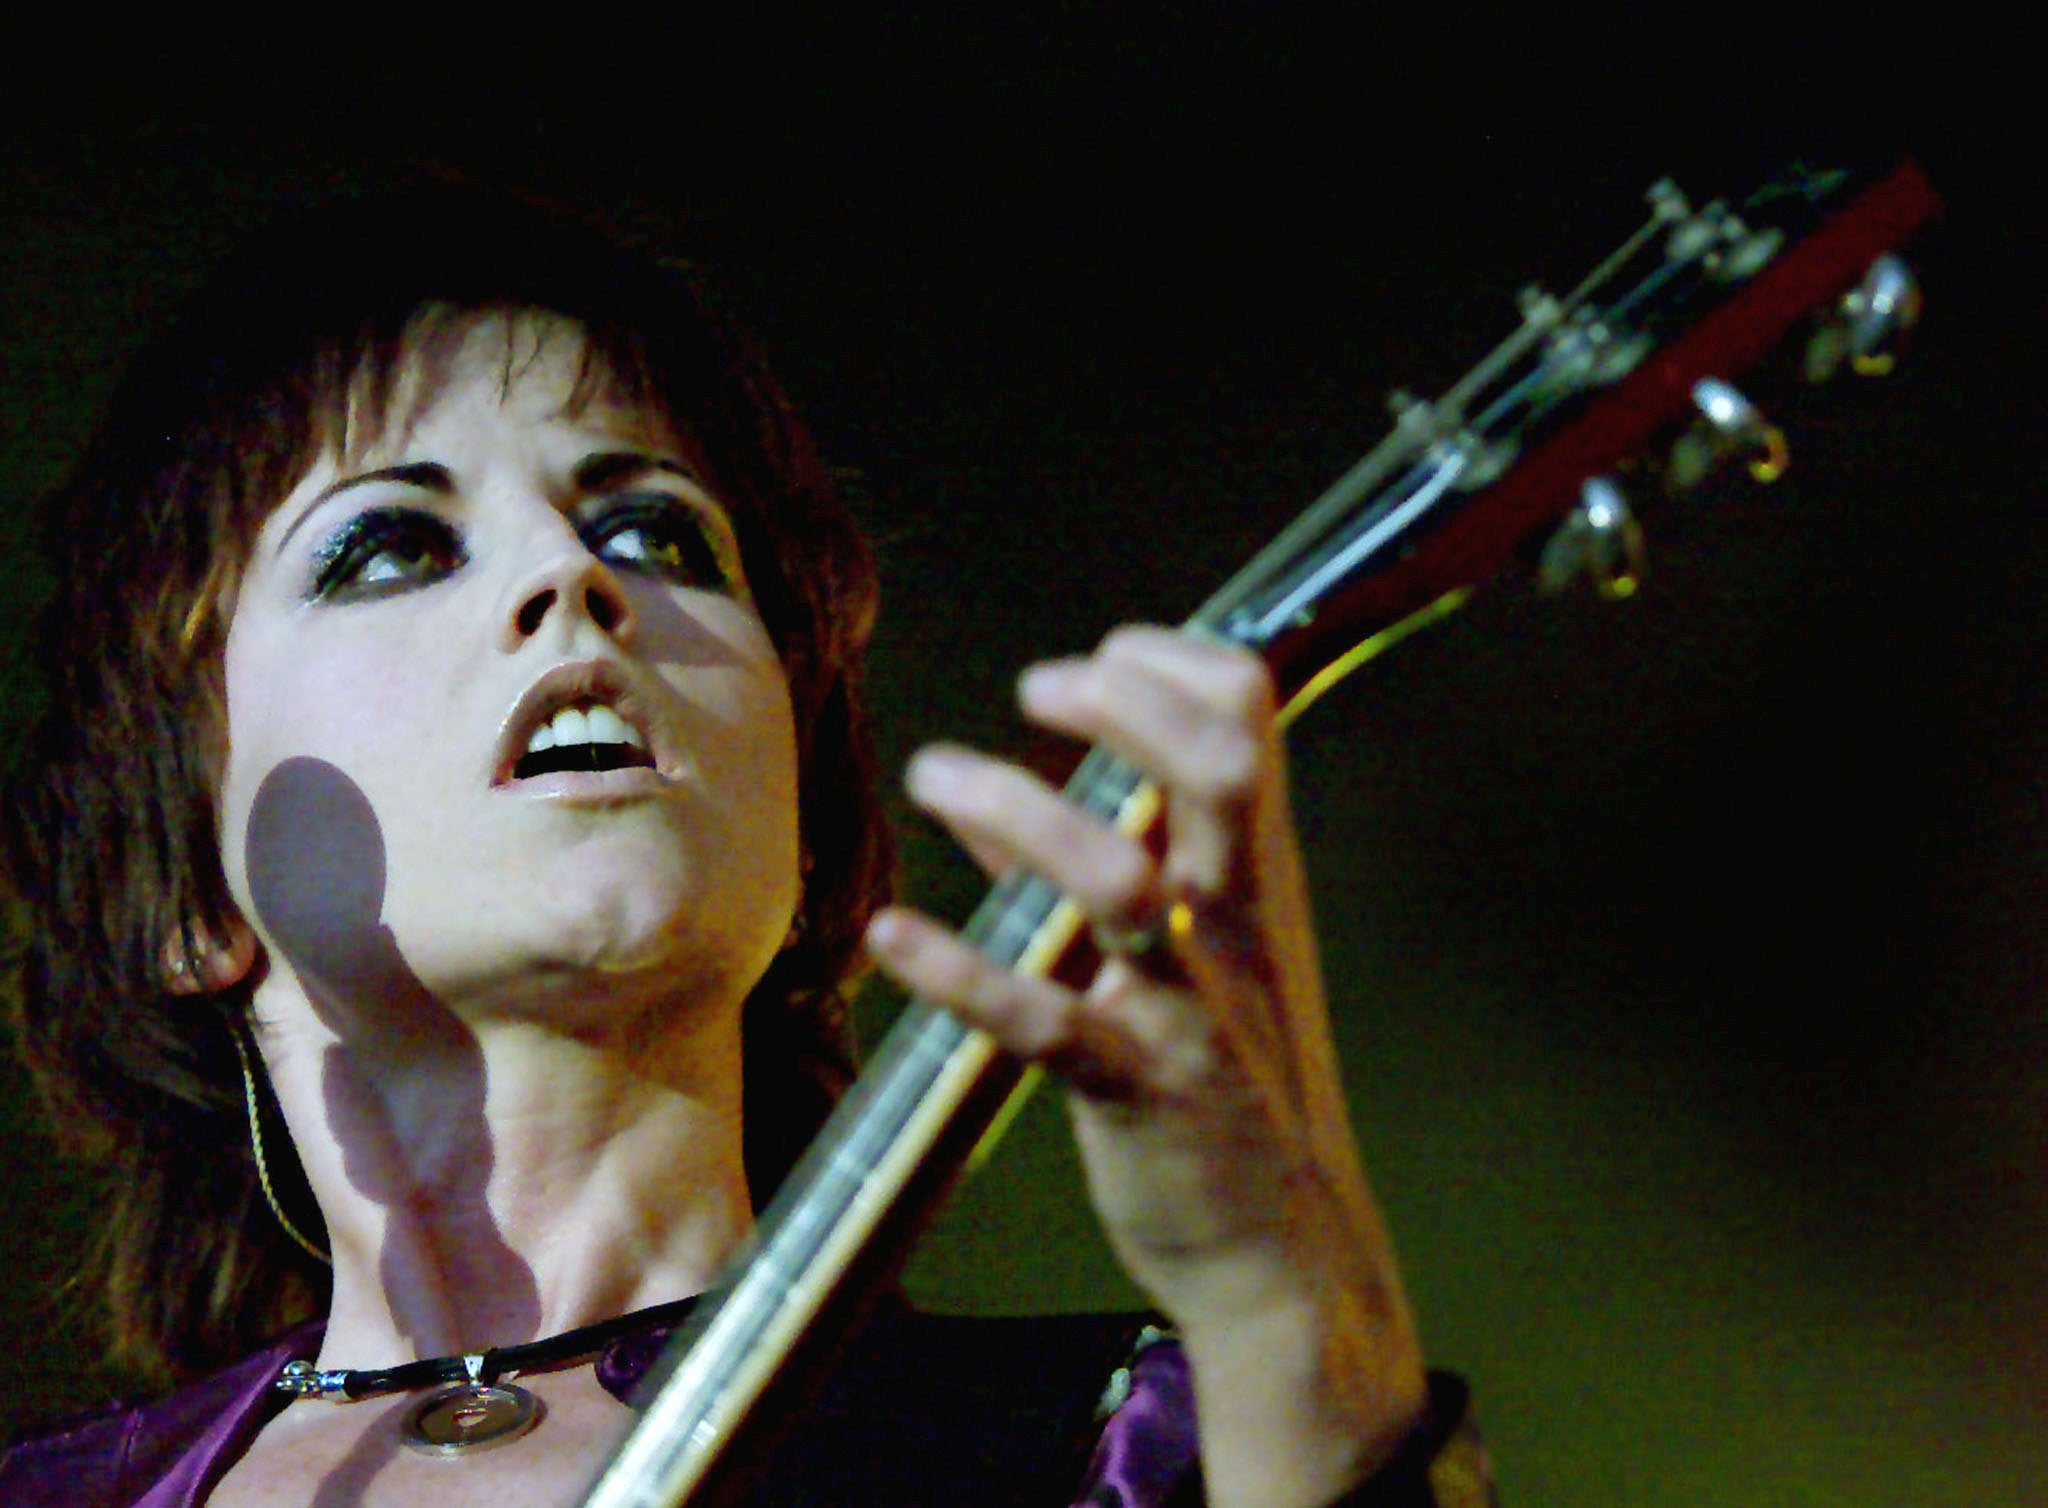 O’Riordan performing at Dublin’s Castle in 2000. She was due to record a cover of The Cranberries’ song ‘Zombie’ hours after her death